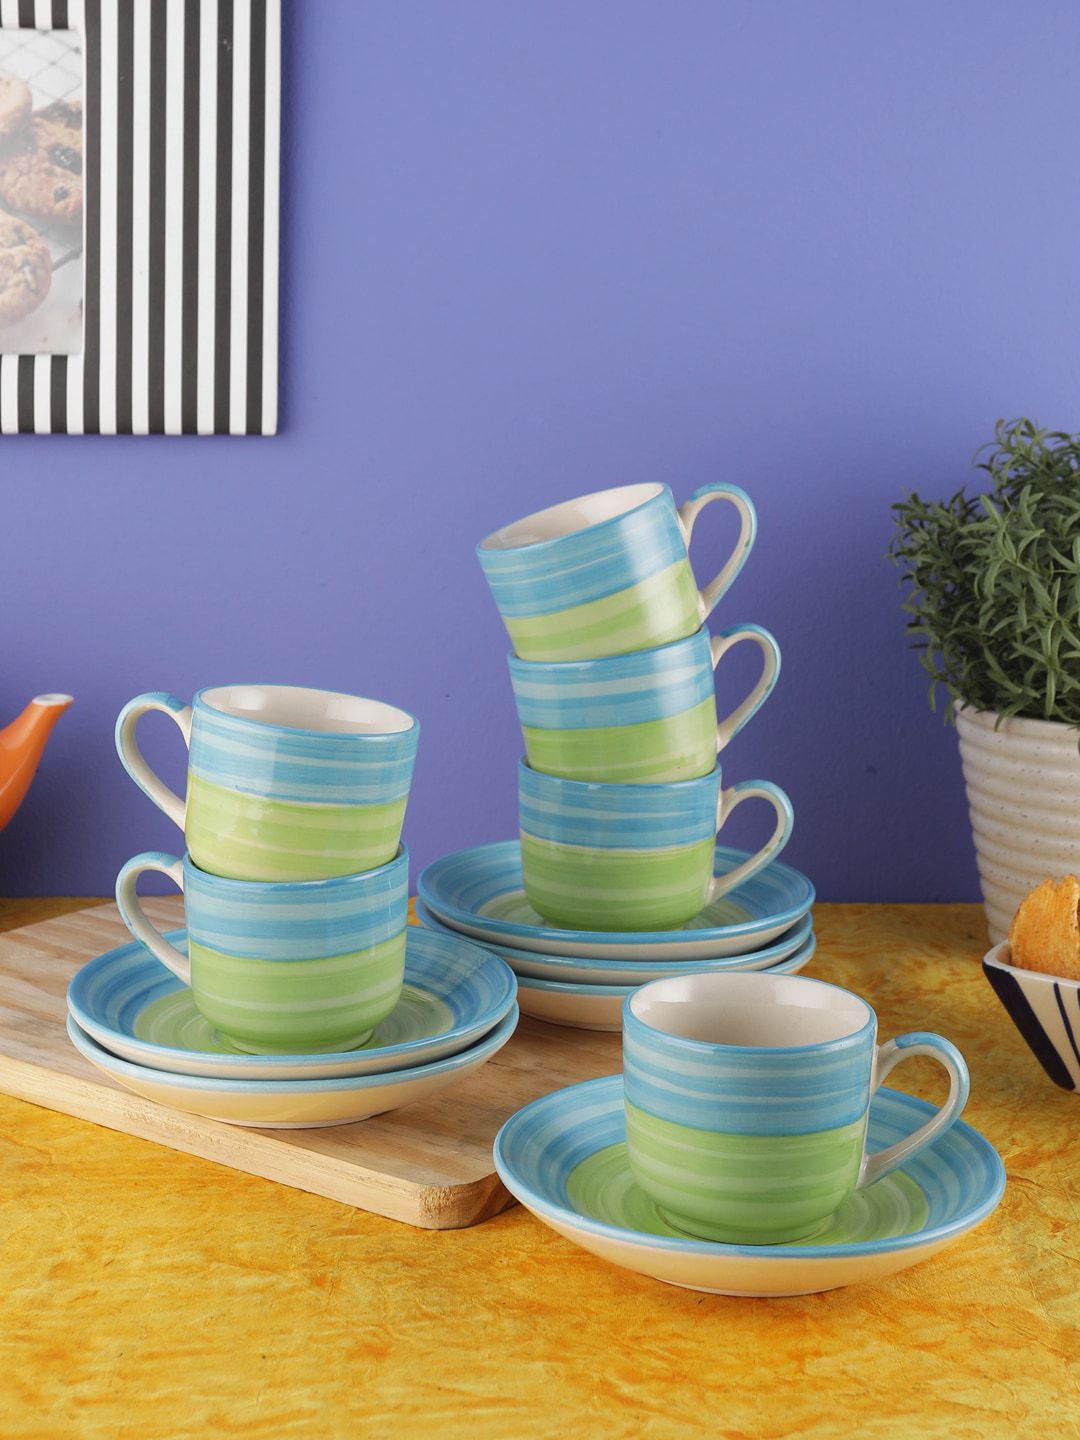 VarEesha Green & Blue 6-Pieces Printed Ceramic Cups and Saucers Set Price in India